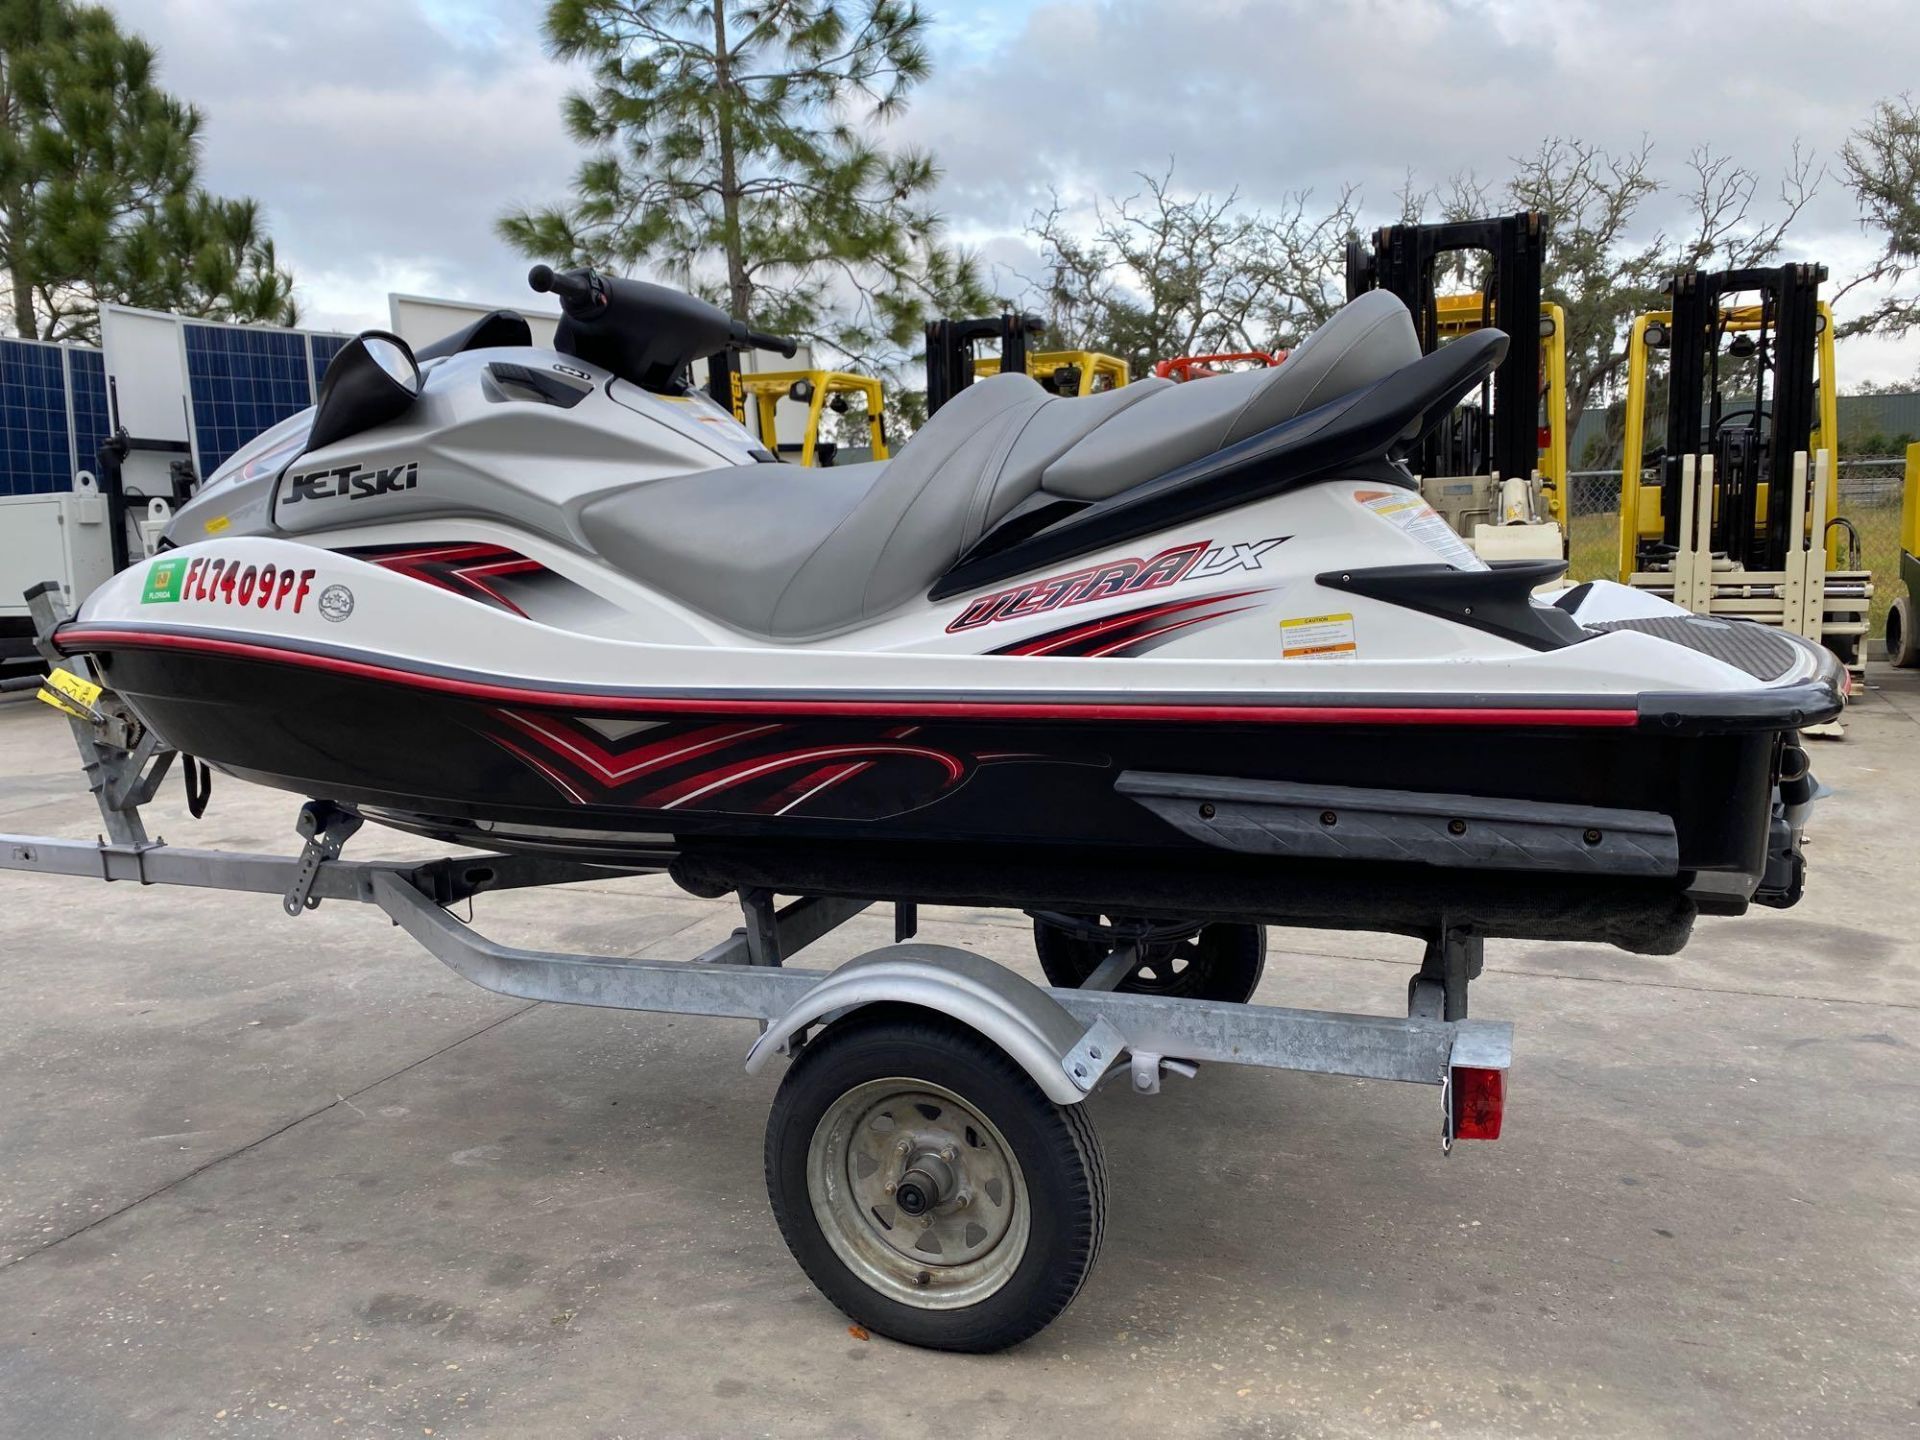 2011 KAWASAKI WAVERUNNER WITH TRAILER, RUNS AND OPERATES, 60 HRS SHOWING - Image 3 of 10